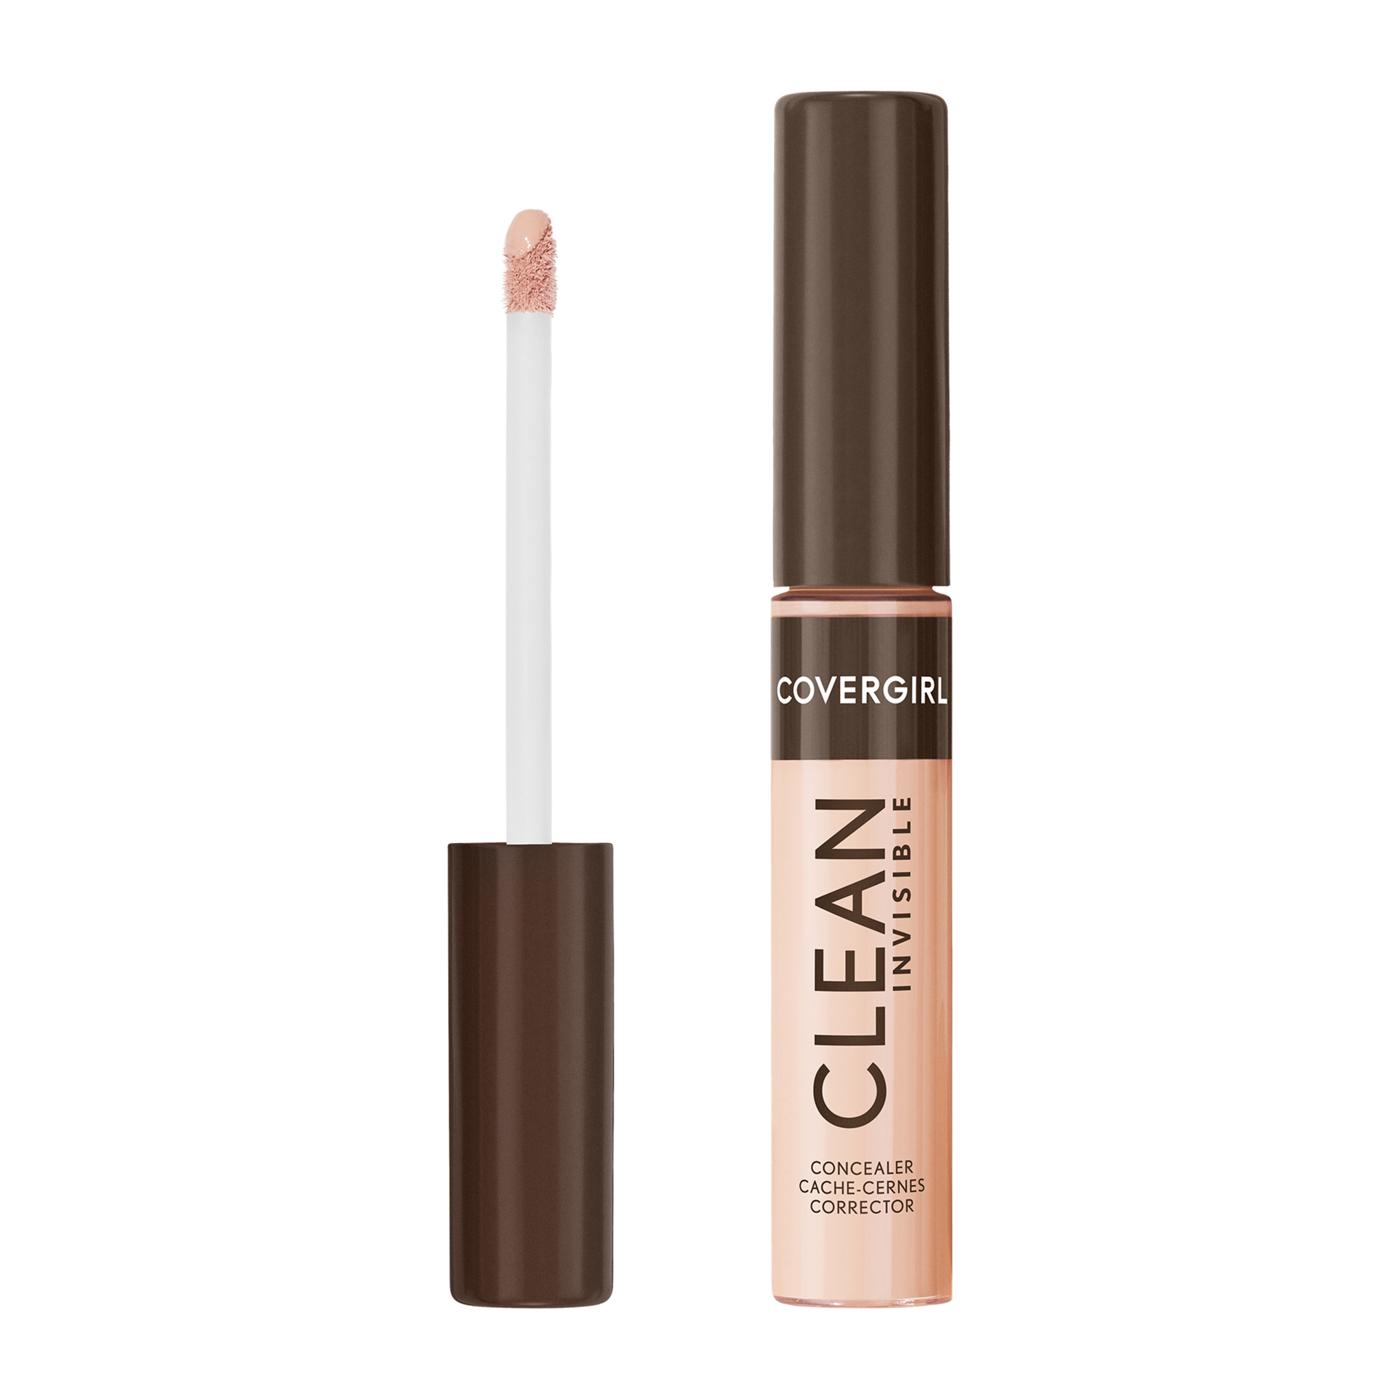 Covergirl Clean Invisible Concealer - Light Beige; image 8 of 15